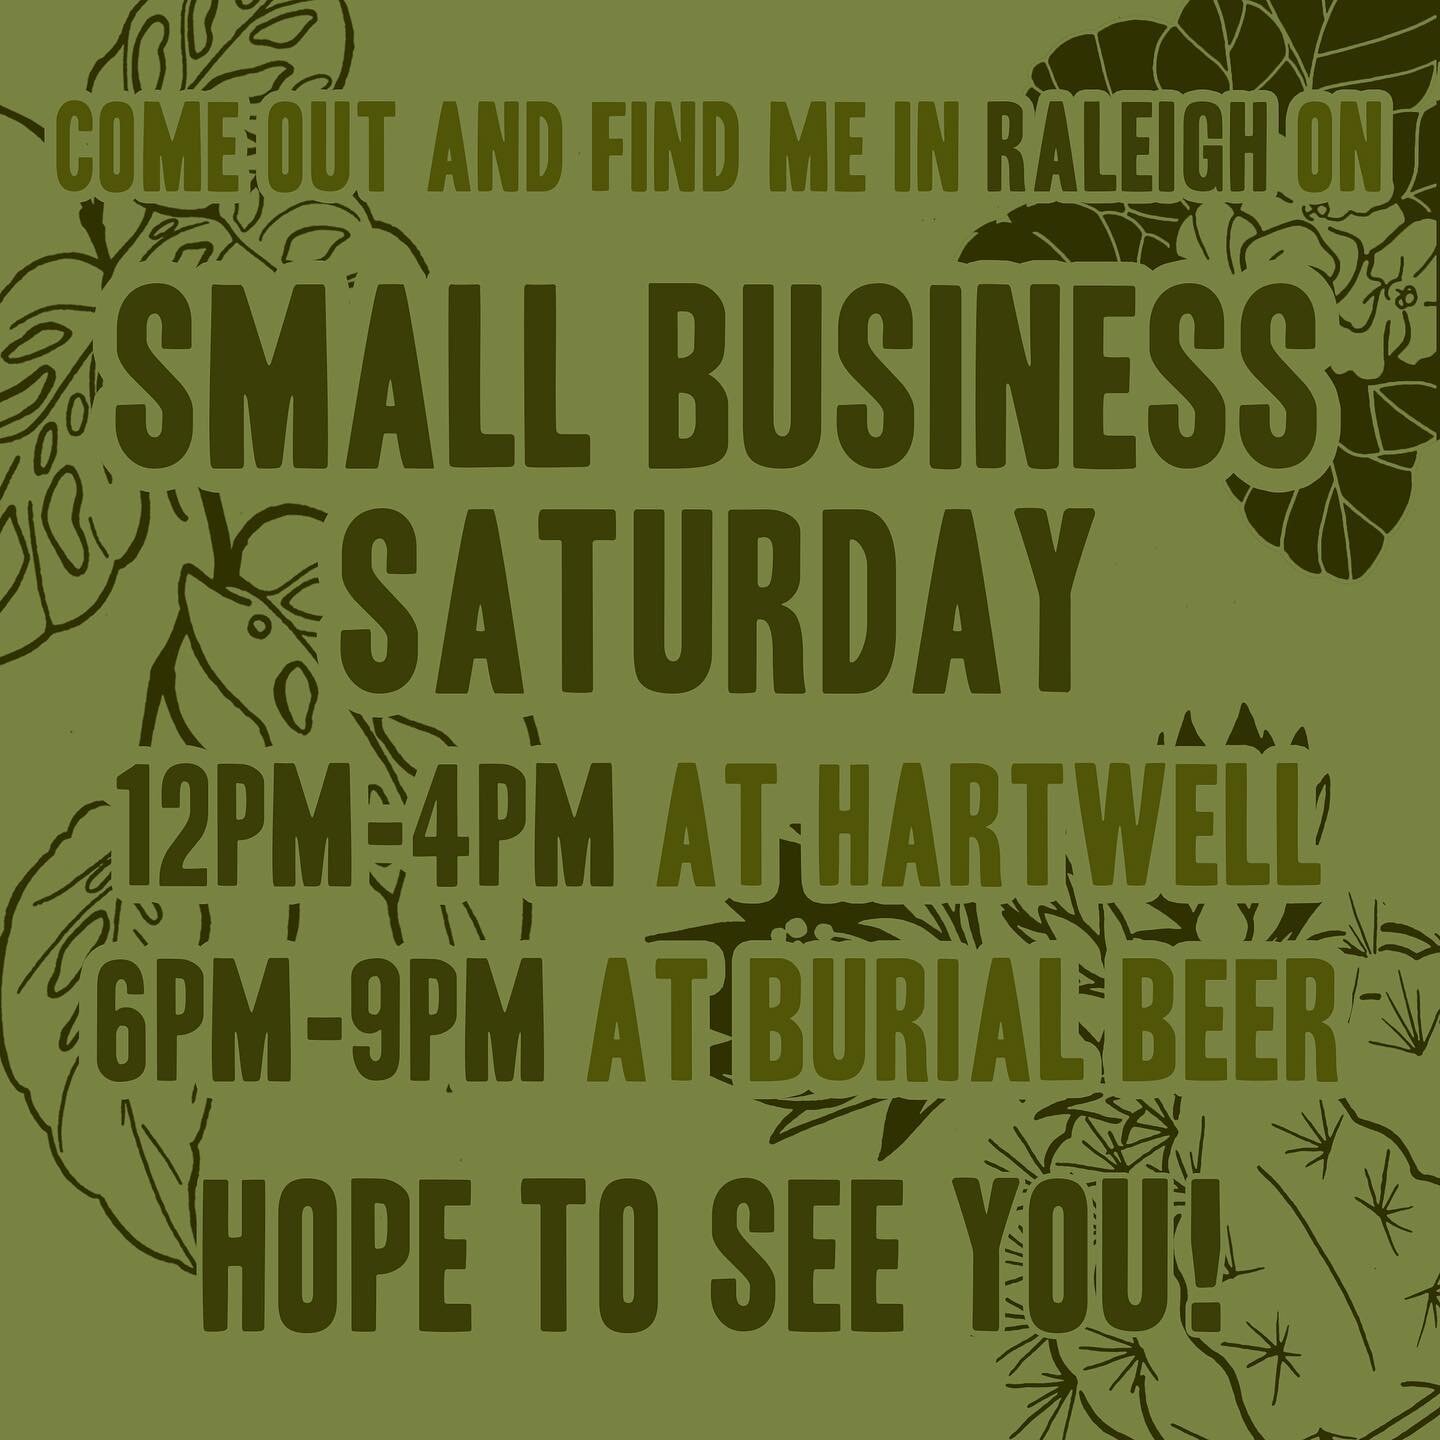 I&rsquo;ll be popping up in not one but TWO lovely spots in Raleigh tomorrow! Come see me at @hartwellraleigh from 12-4 and @burialdtr from 6-9, I&rsquo;ll have a bunch of rad new vintage pieces as well as my limited run of terrarium Christmas orname